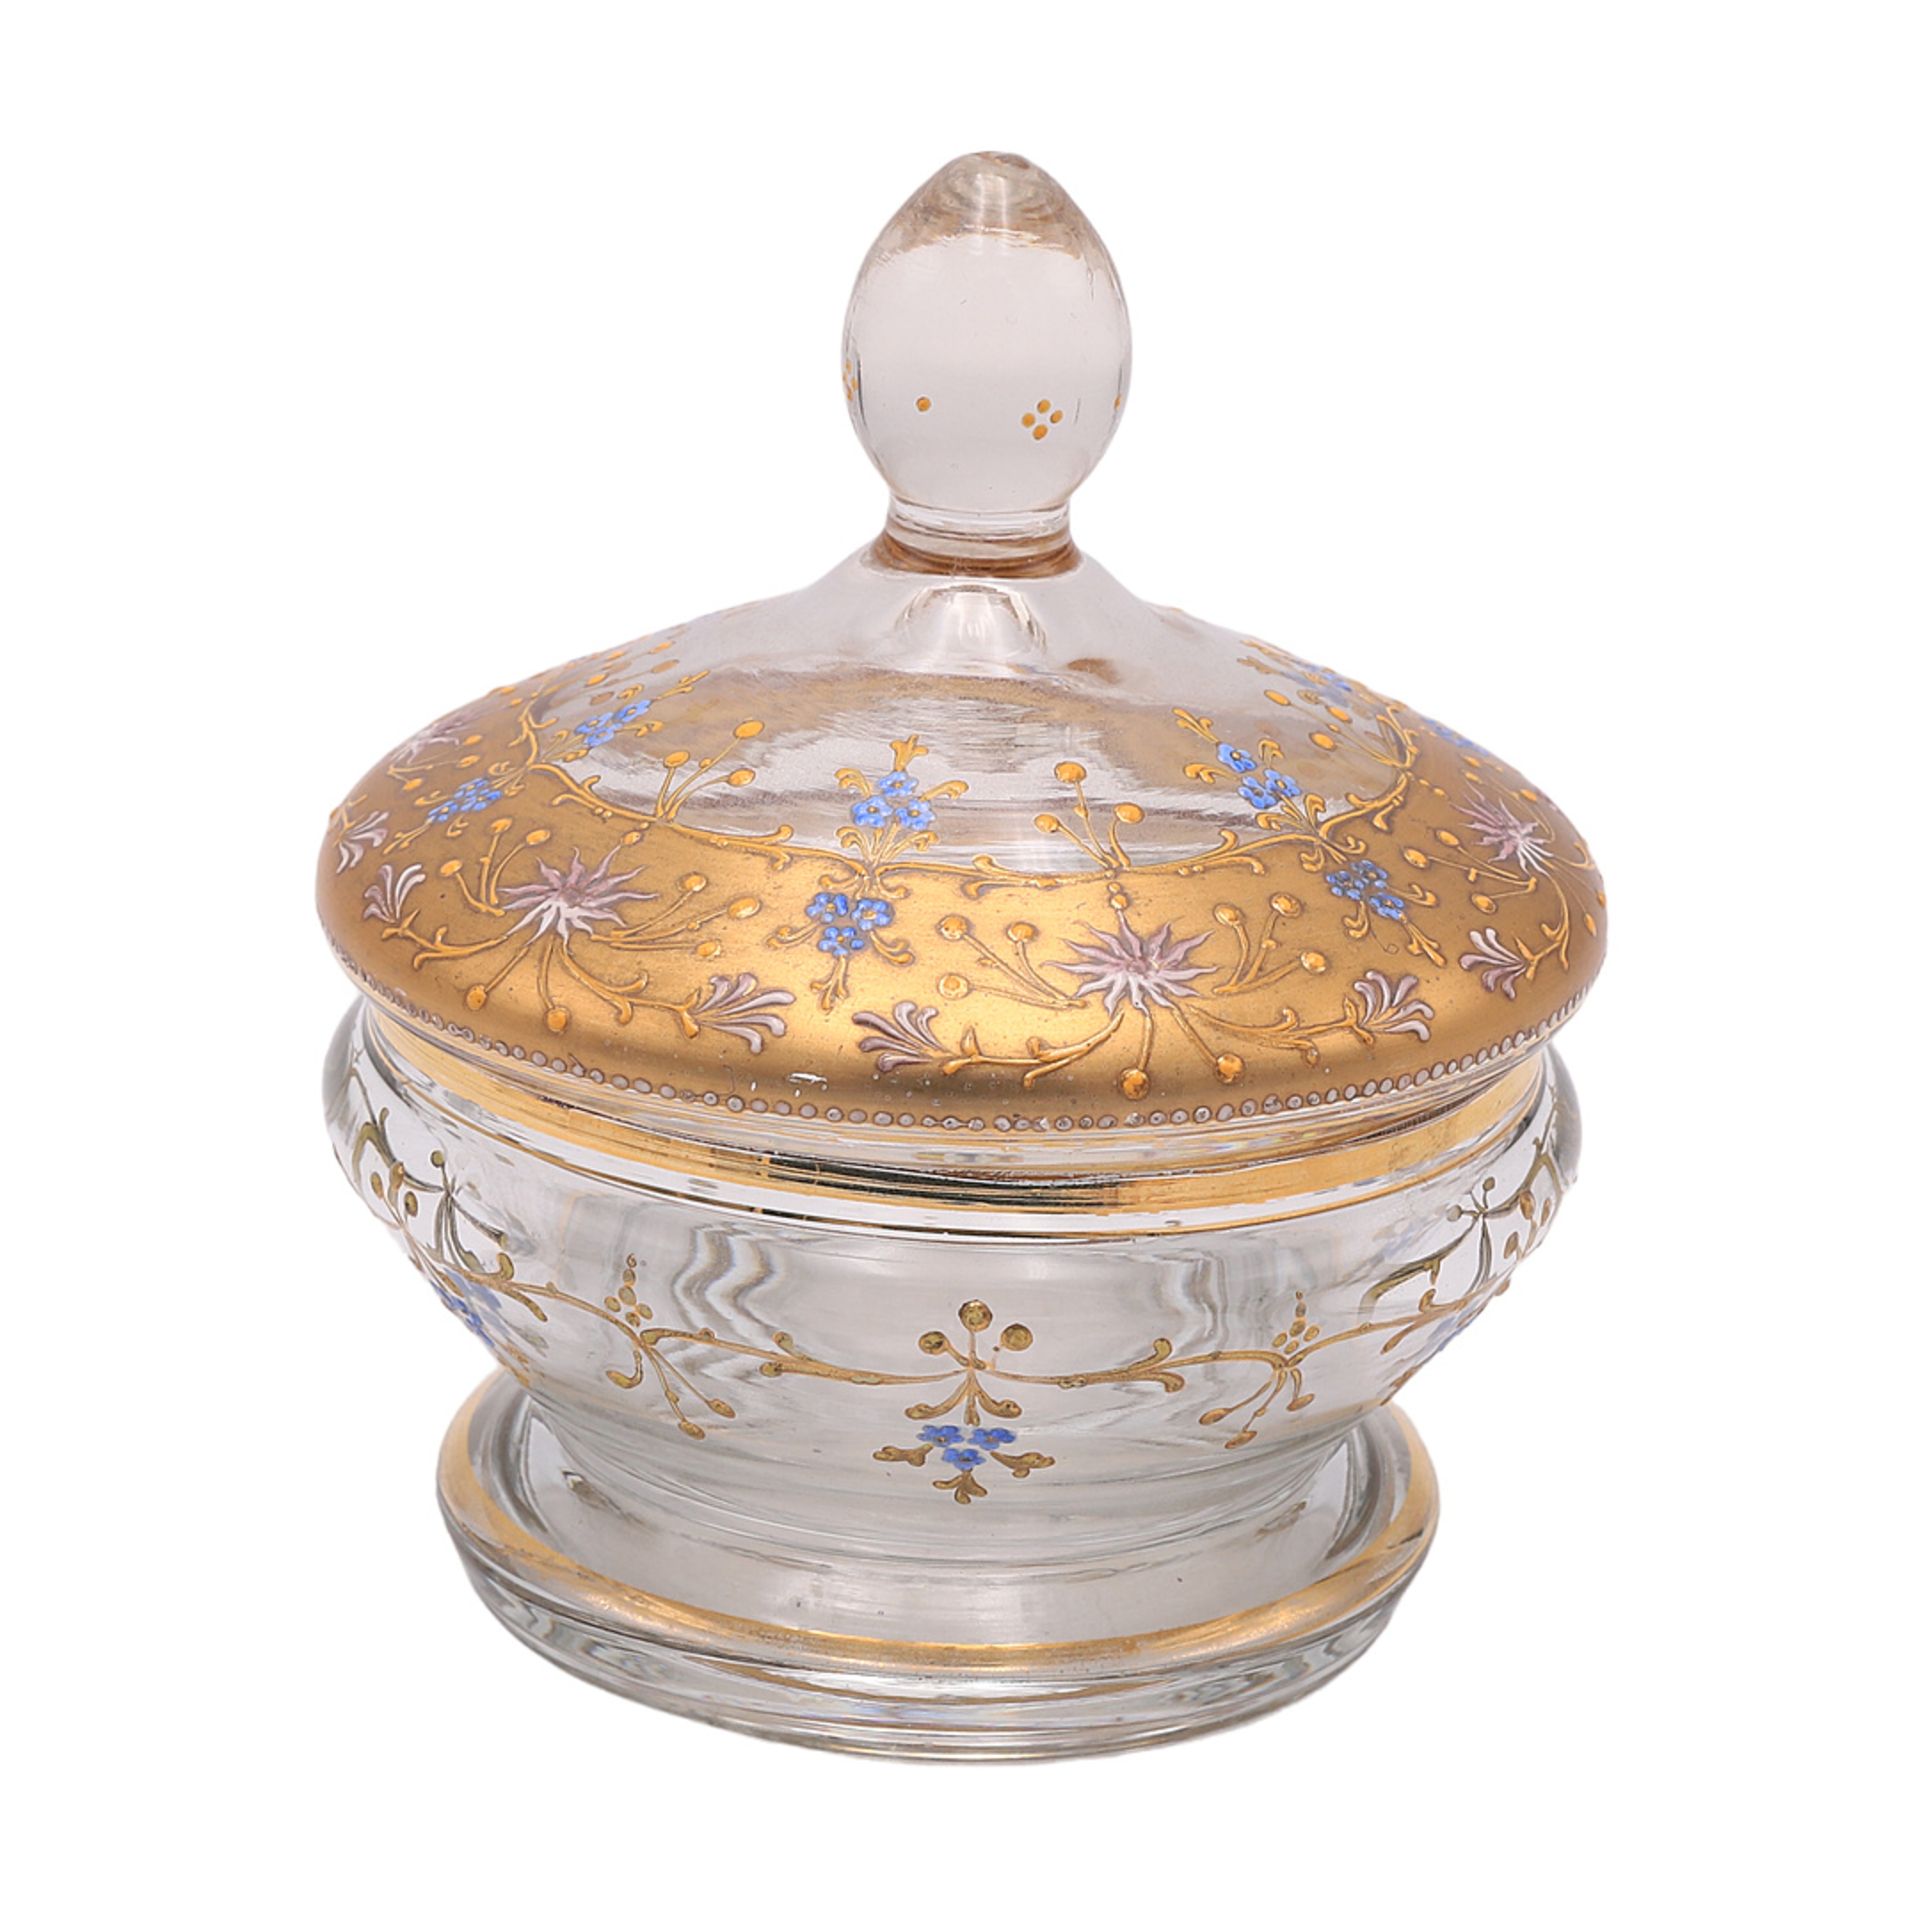 Lidded box "Forget-me-not?, North Bohemian glassworks, around 1900